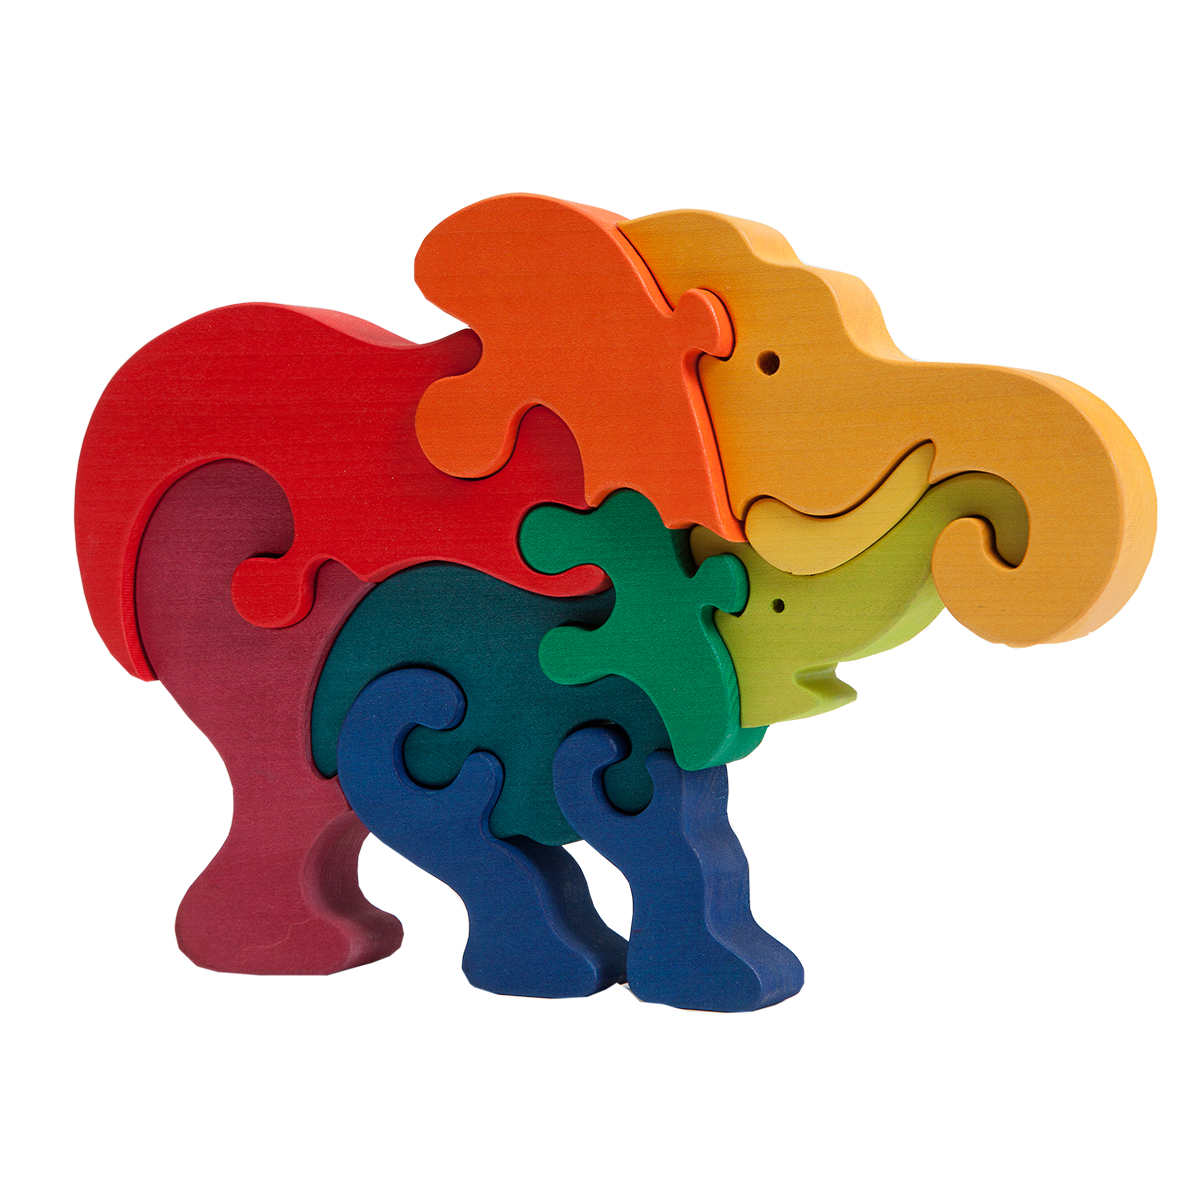 Colourful father and child elephant puzzle made of wood